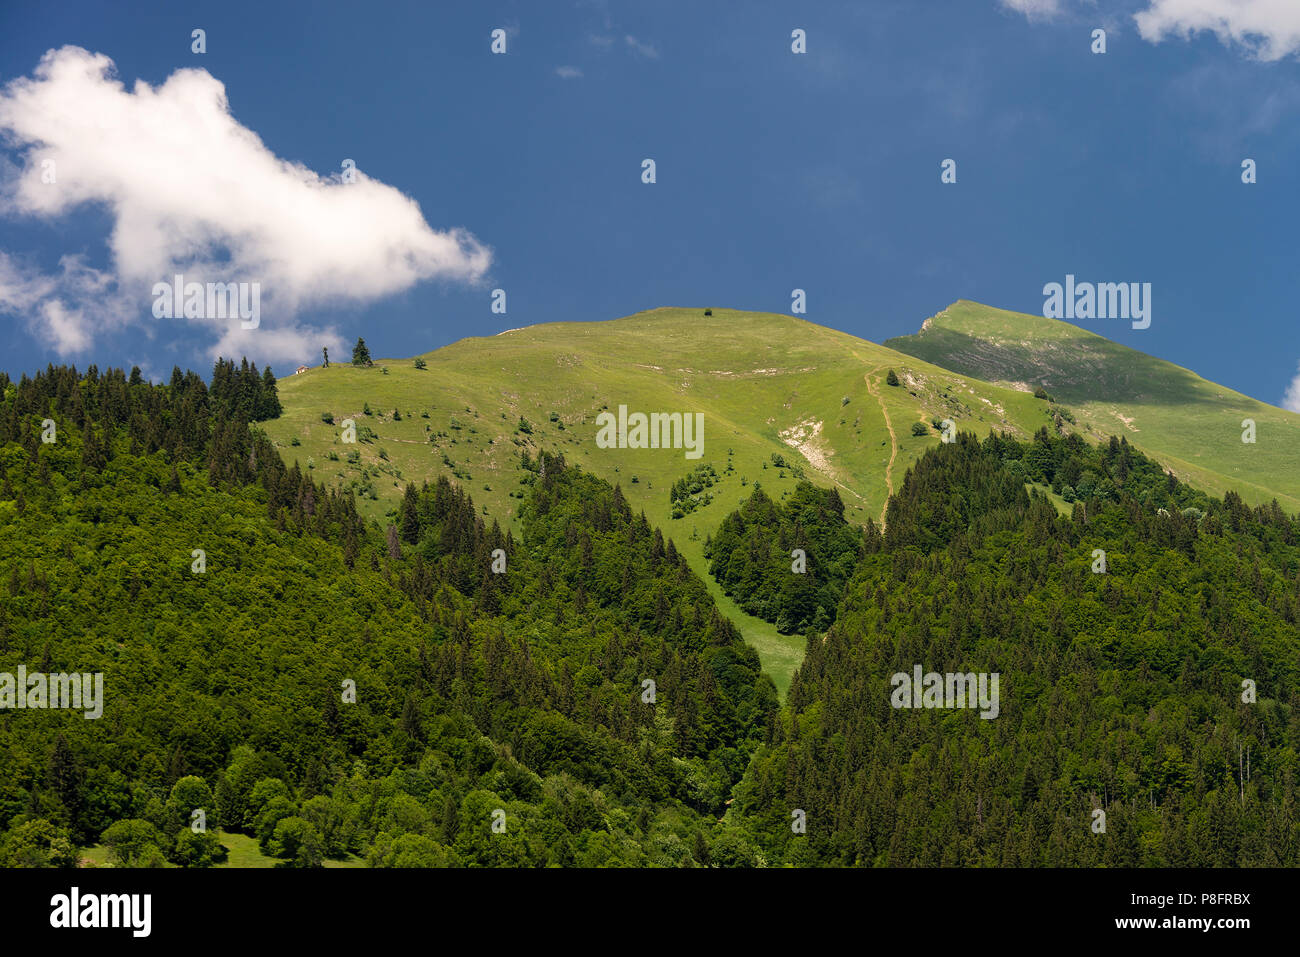 The Beautiful Pointe de Nantaux Mountain near Morzine with Pine Forest on its Slopeson a Summers Day Haute Savoie Portes du Soleil France Stock Photo